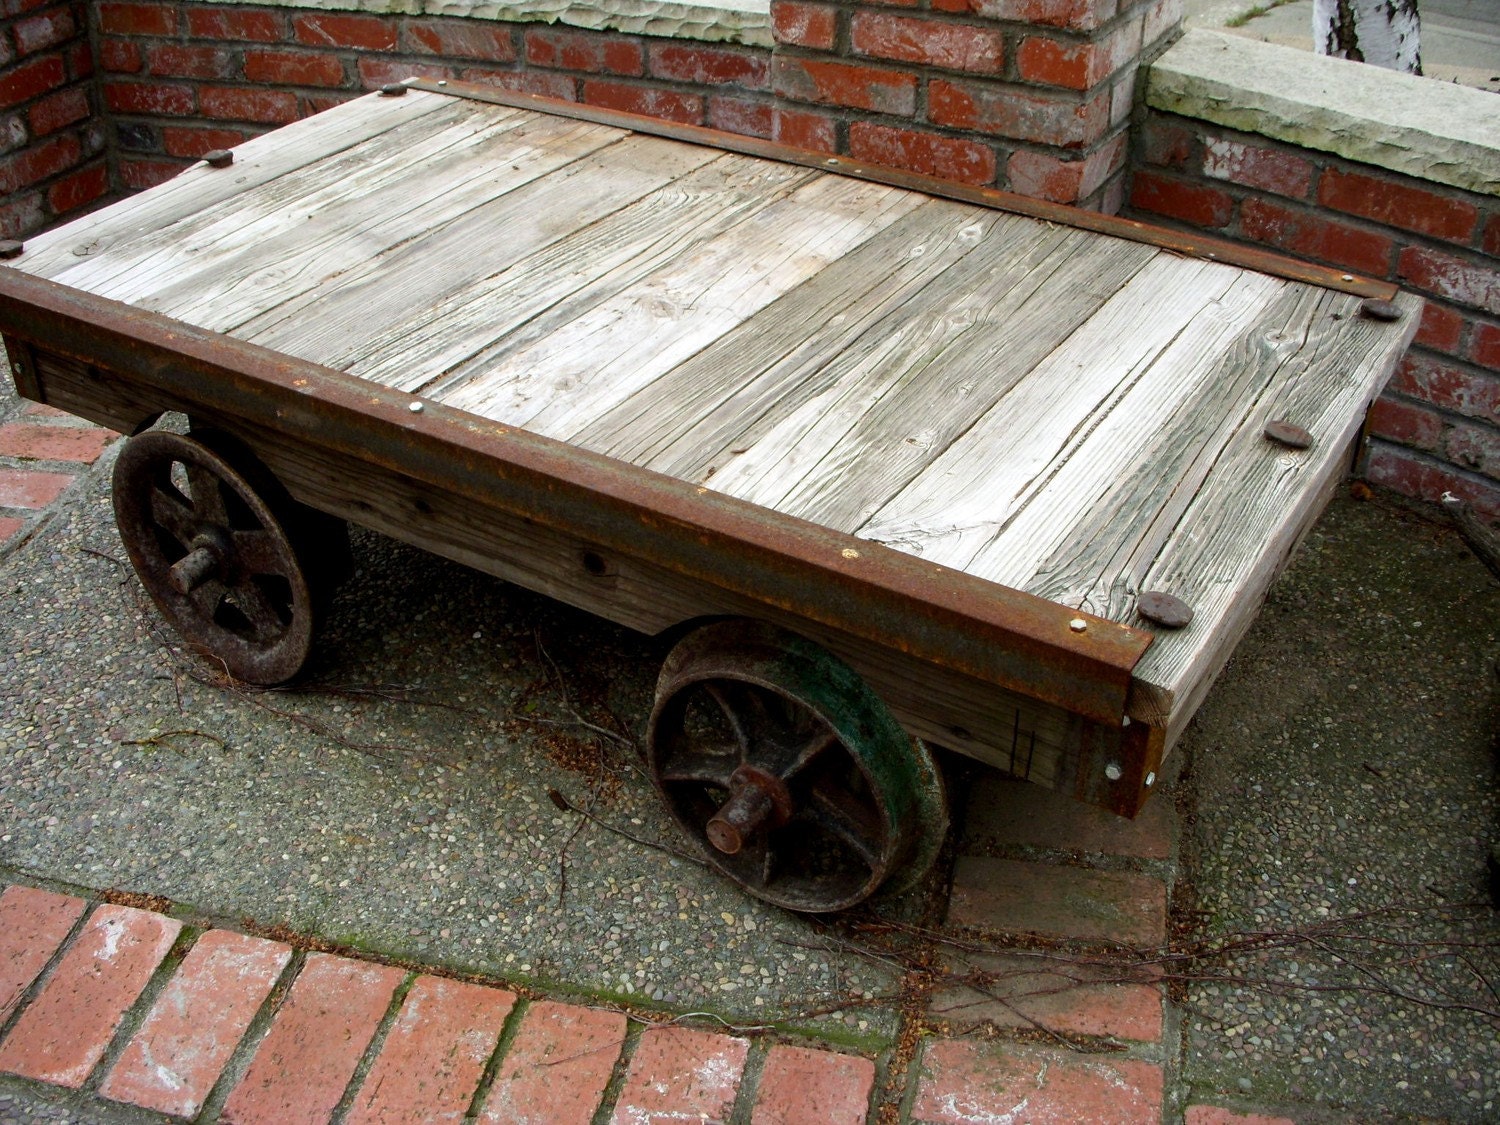 Handmade Coffee Table - Industrial, Shabby Chic, Paris Apartment, French Country, Old Gold Mining Cart